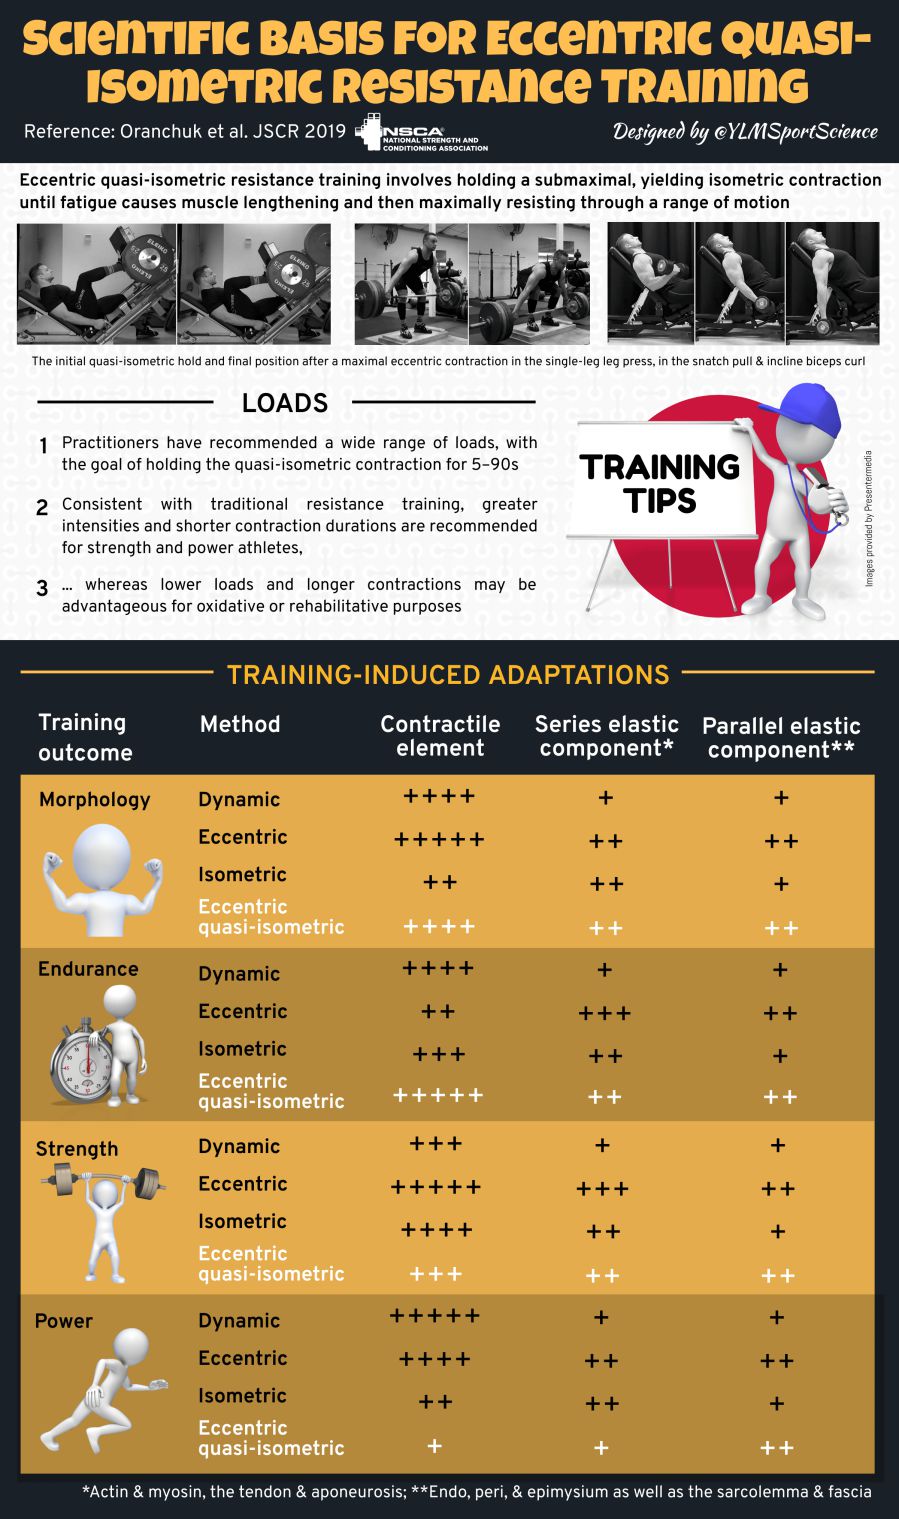 This infographic briefly reviews the application and training adaptations of eccentric quasi-isometric resistance training.